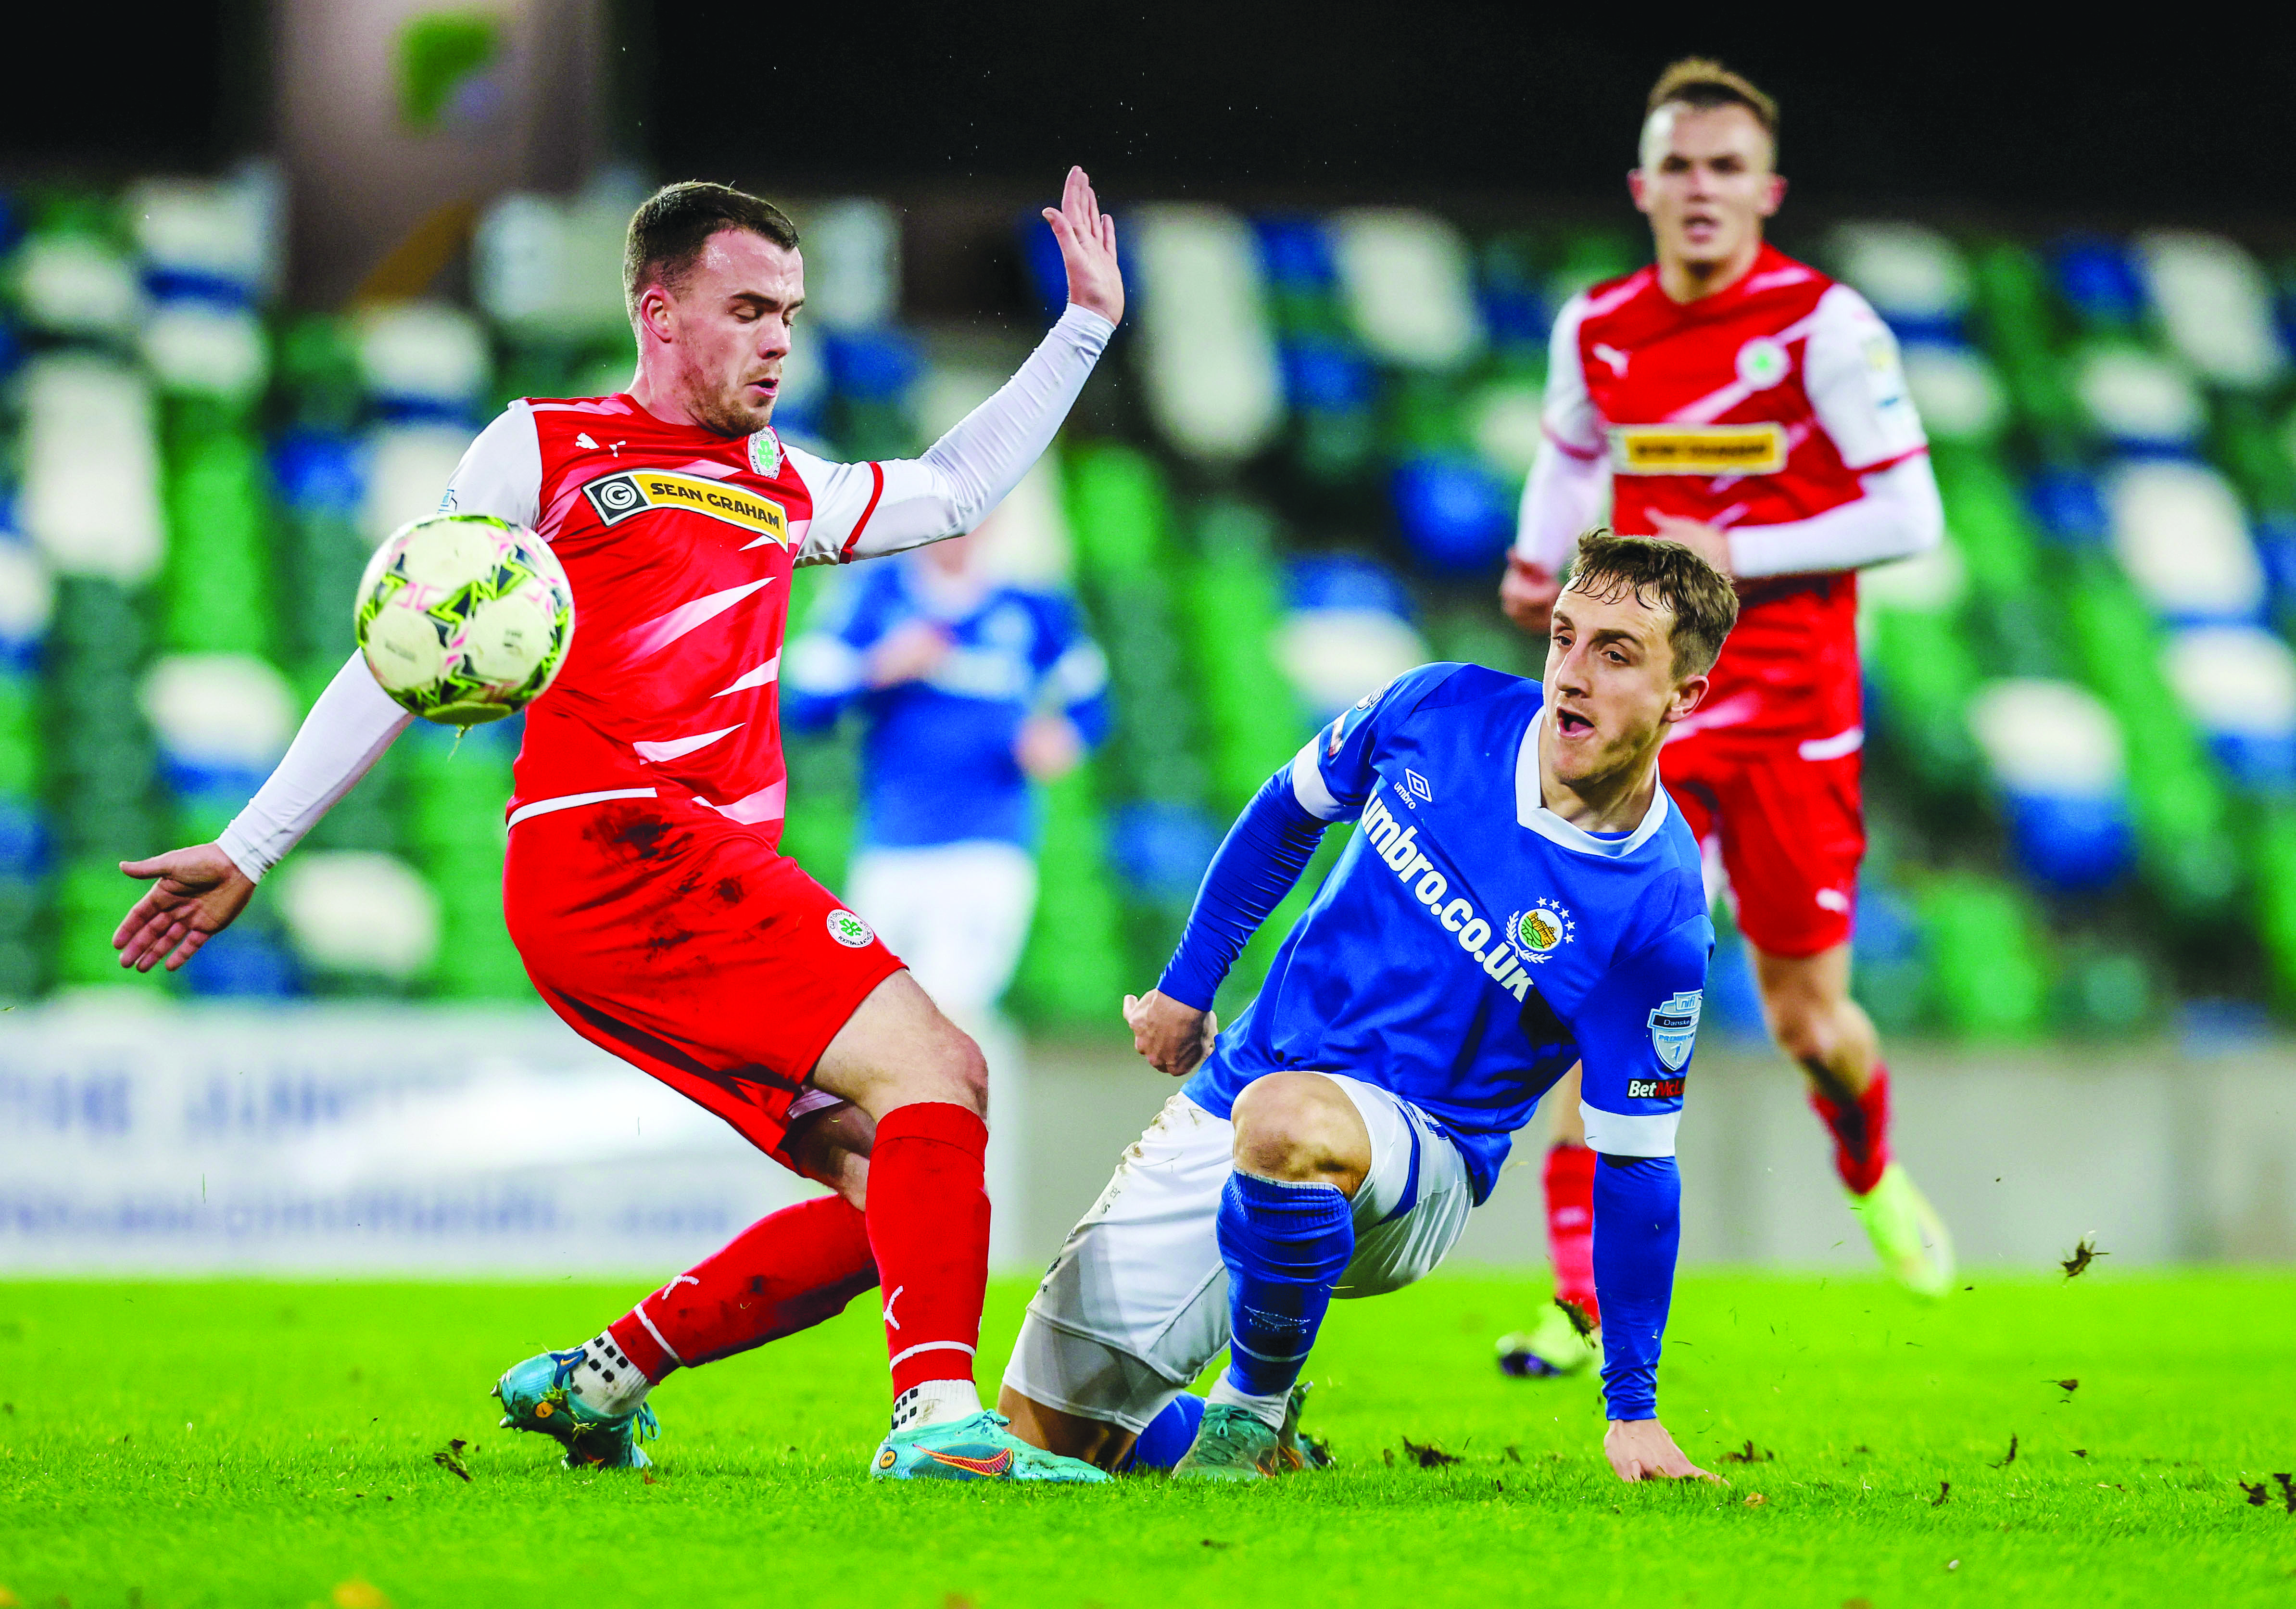 Cliftonville scored two straight draws against Glenavon last Saturday and at Windsor Park against Linfield on Tuesday